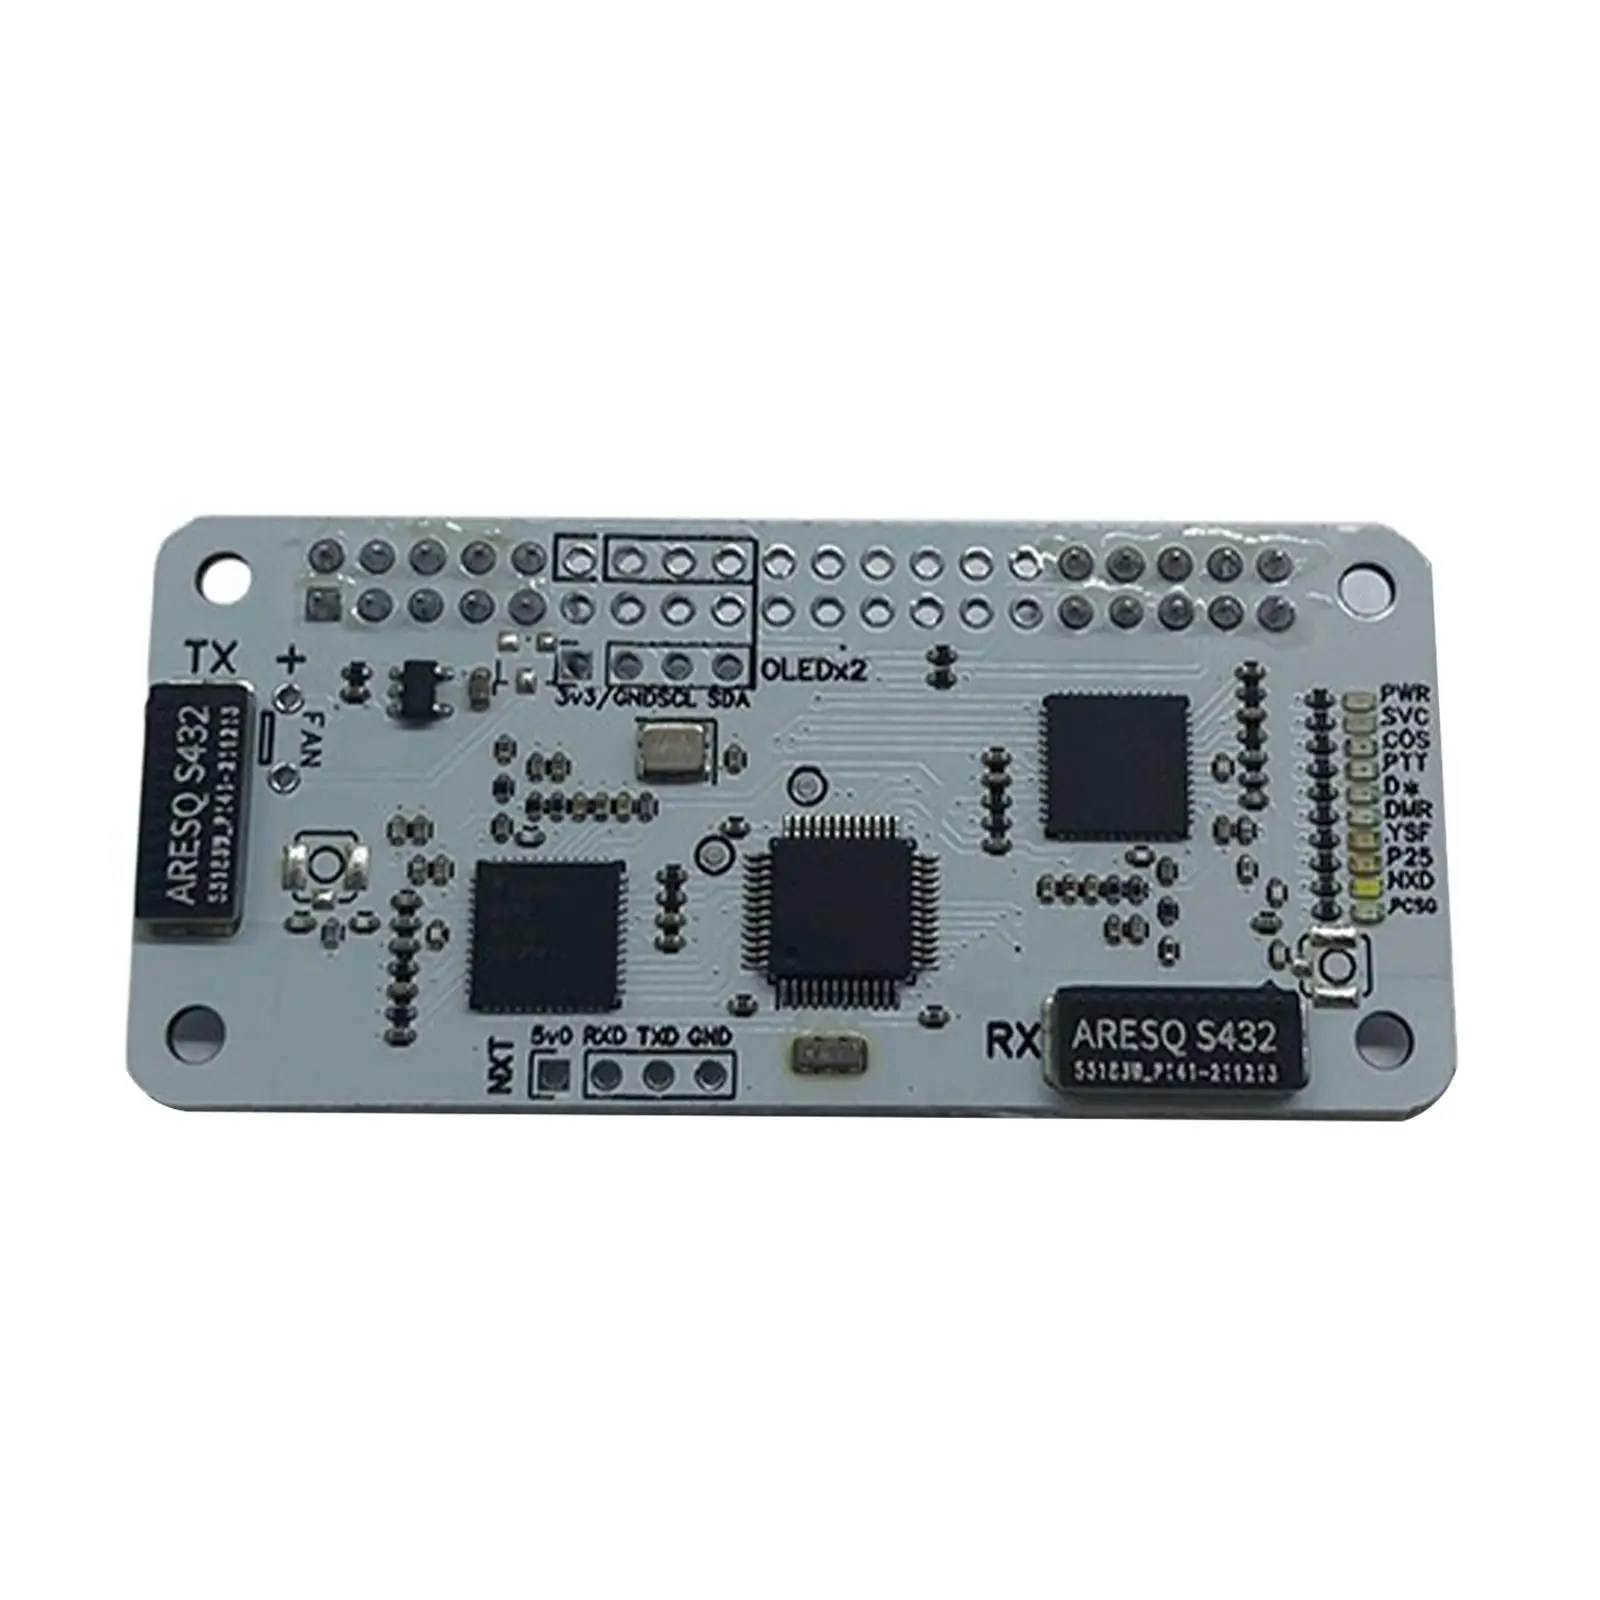 Two Modes Point Board Replacement ,High accessories, Easy to Install Metal hotspots Board Kit Access, for P25 DMR Ysf softwares